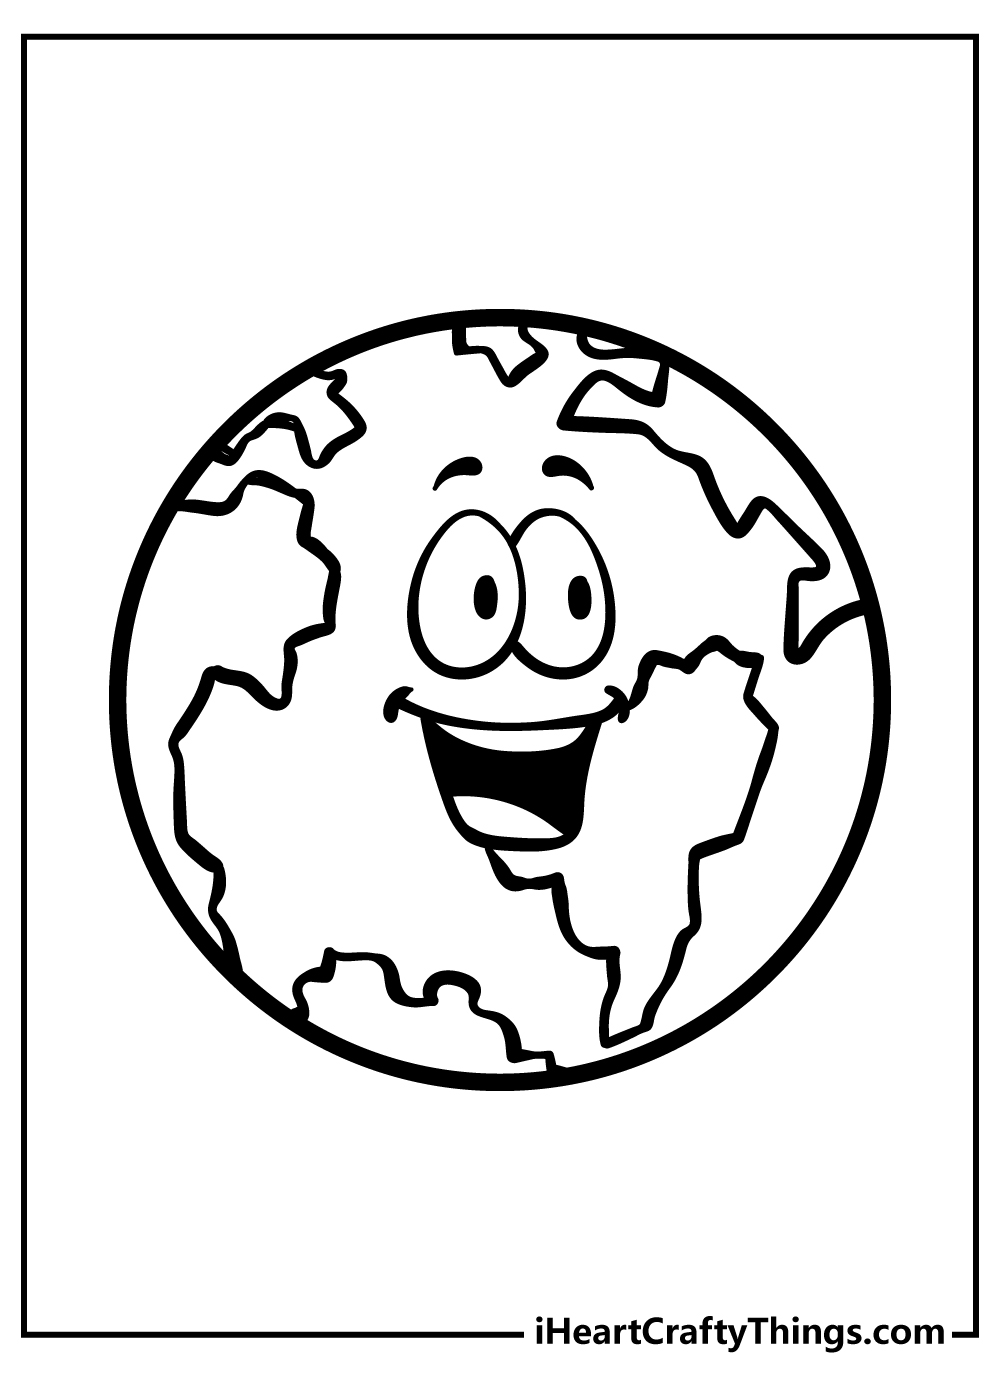 Earth coloring pages free printables